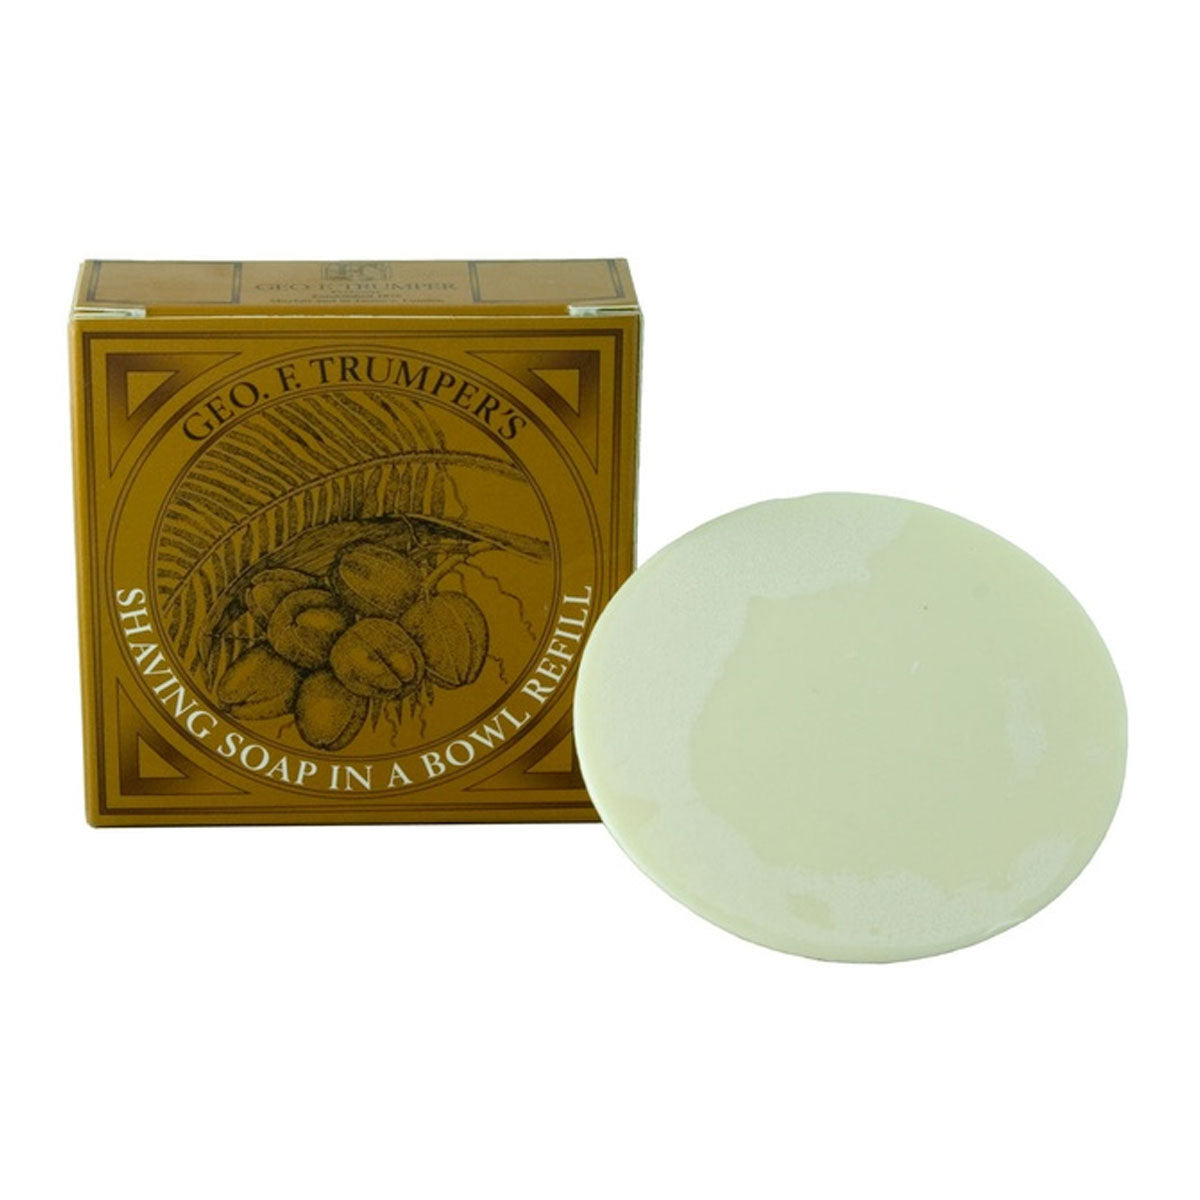 Primary image of Coconut Oil Shave Soap Refill